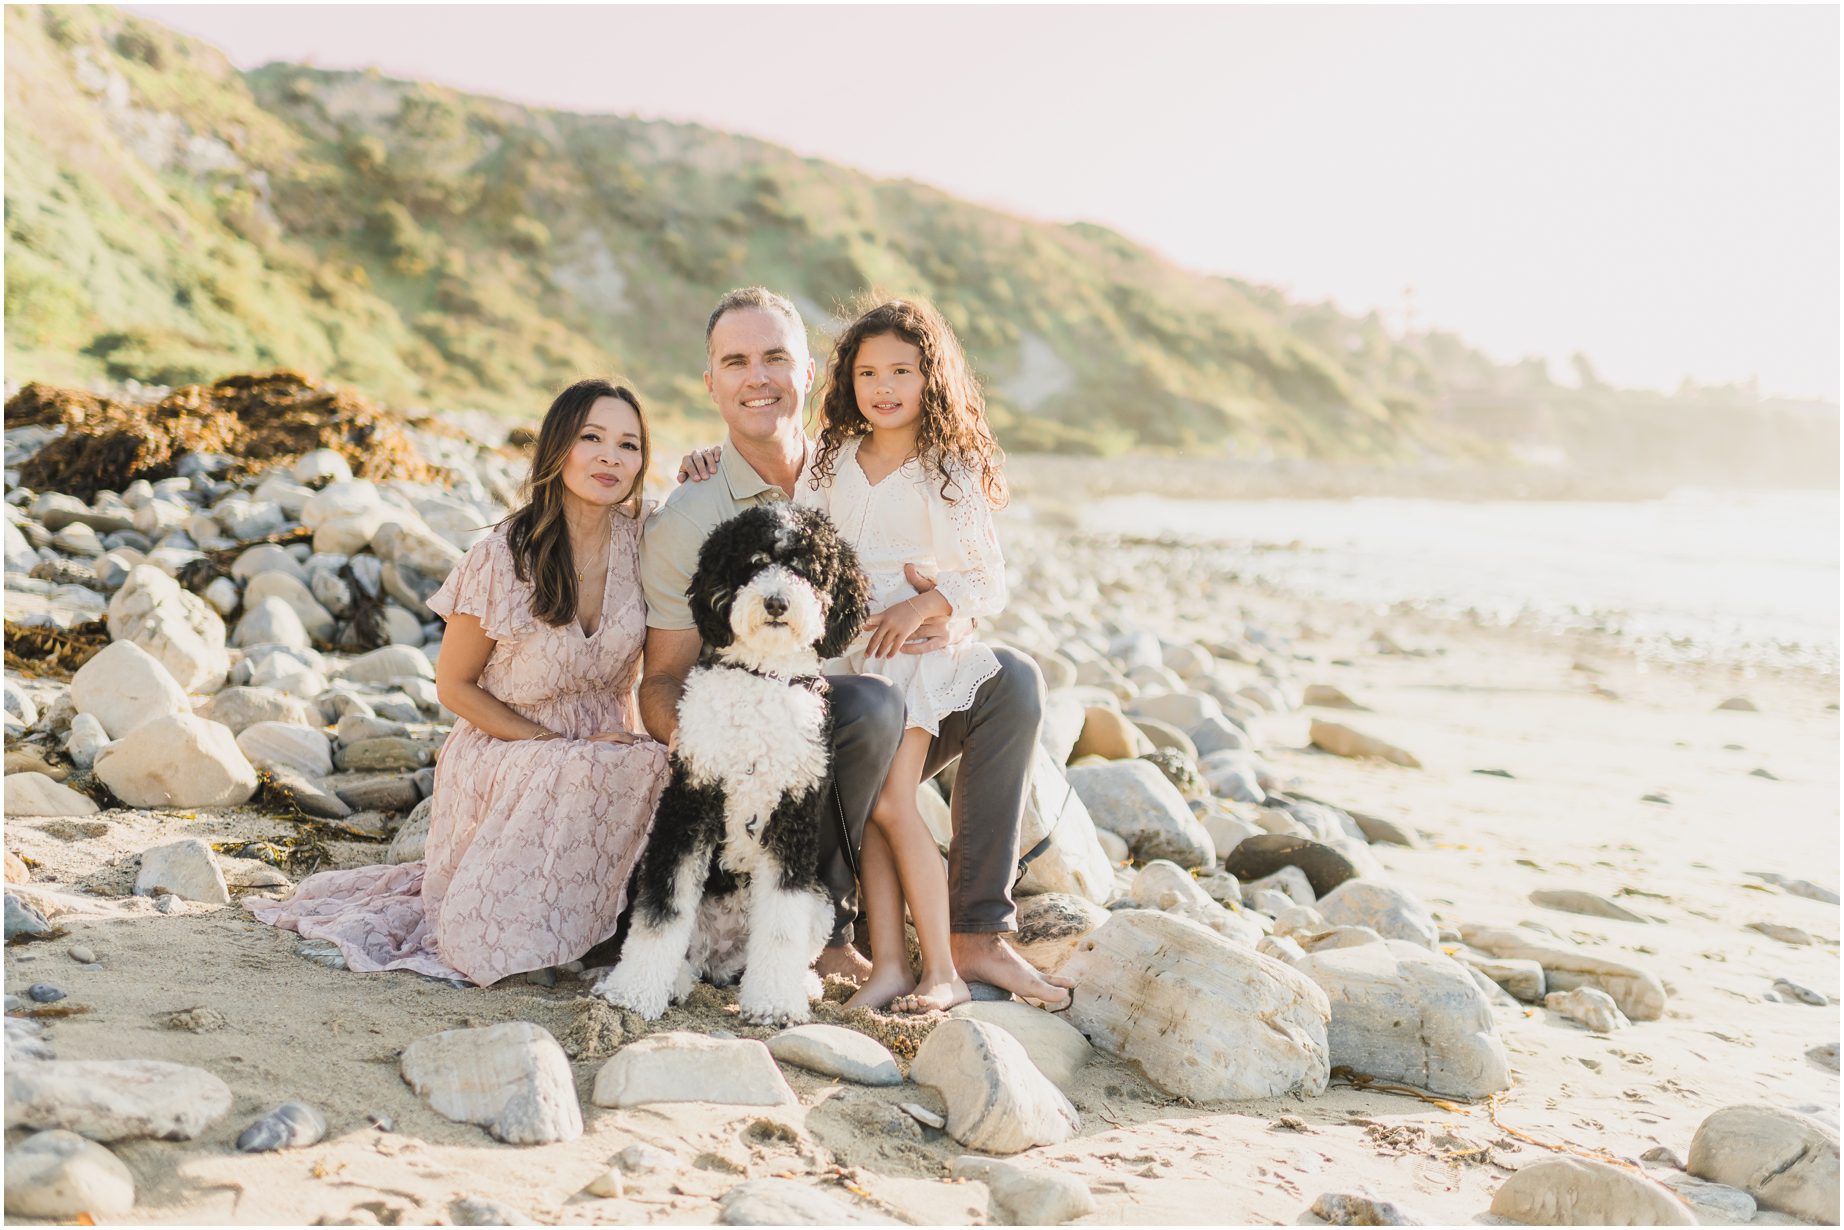 A family with a dog poses for sunset photos during their Holiday Mini Session